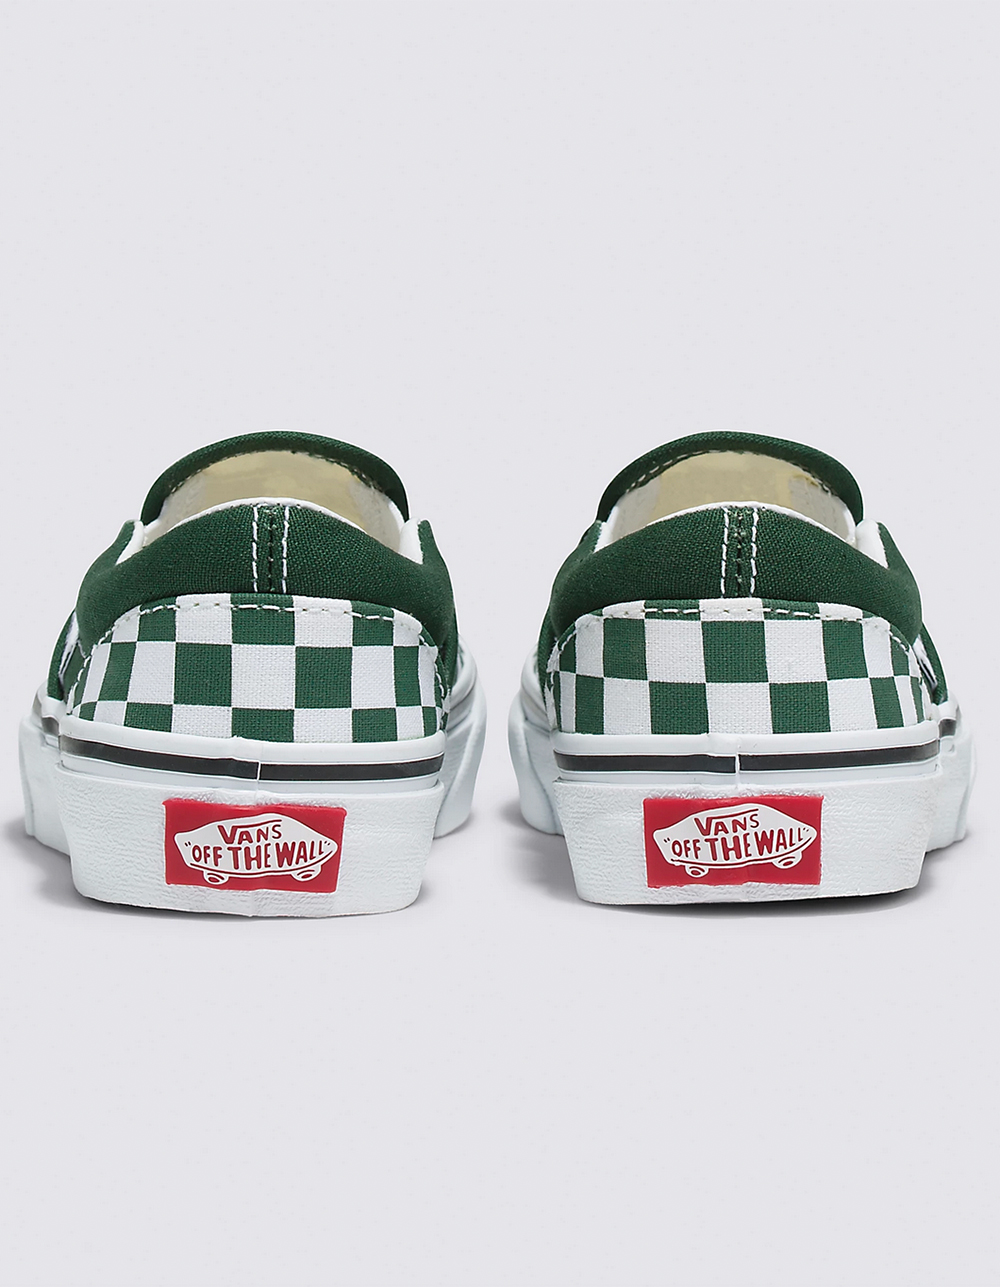 VANS Classic Slip-On Kids Checkerboard Shoes